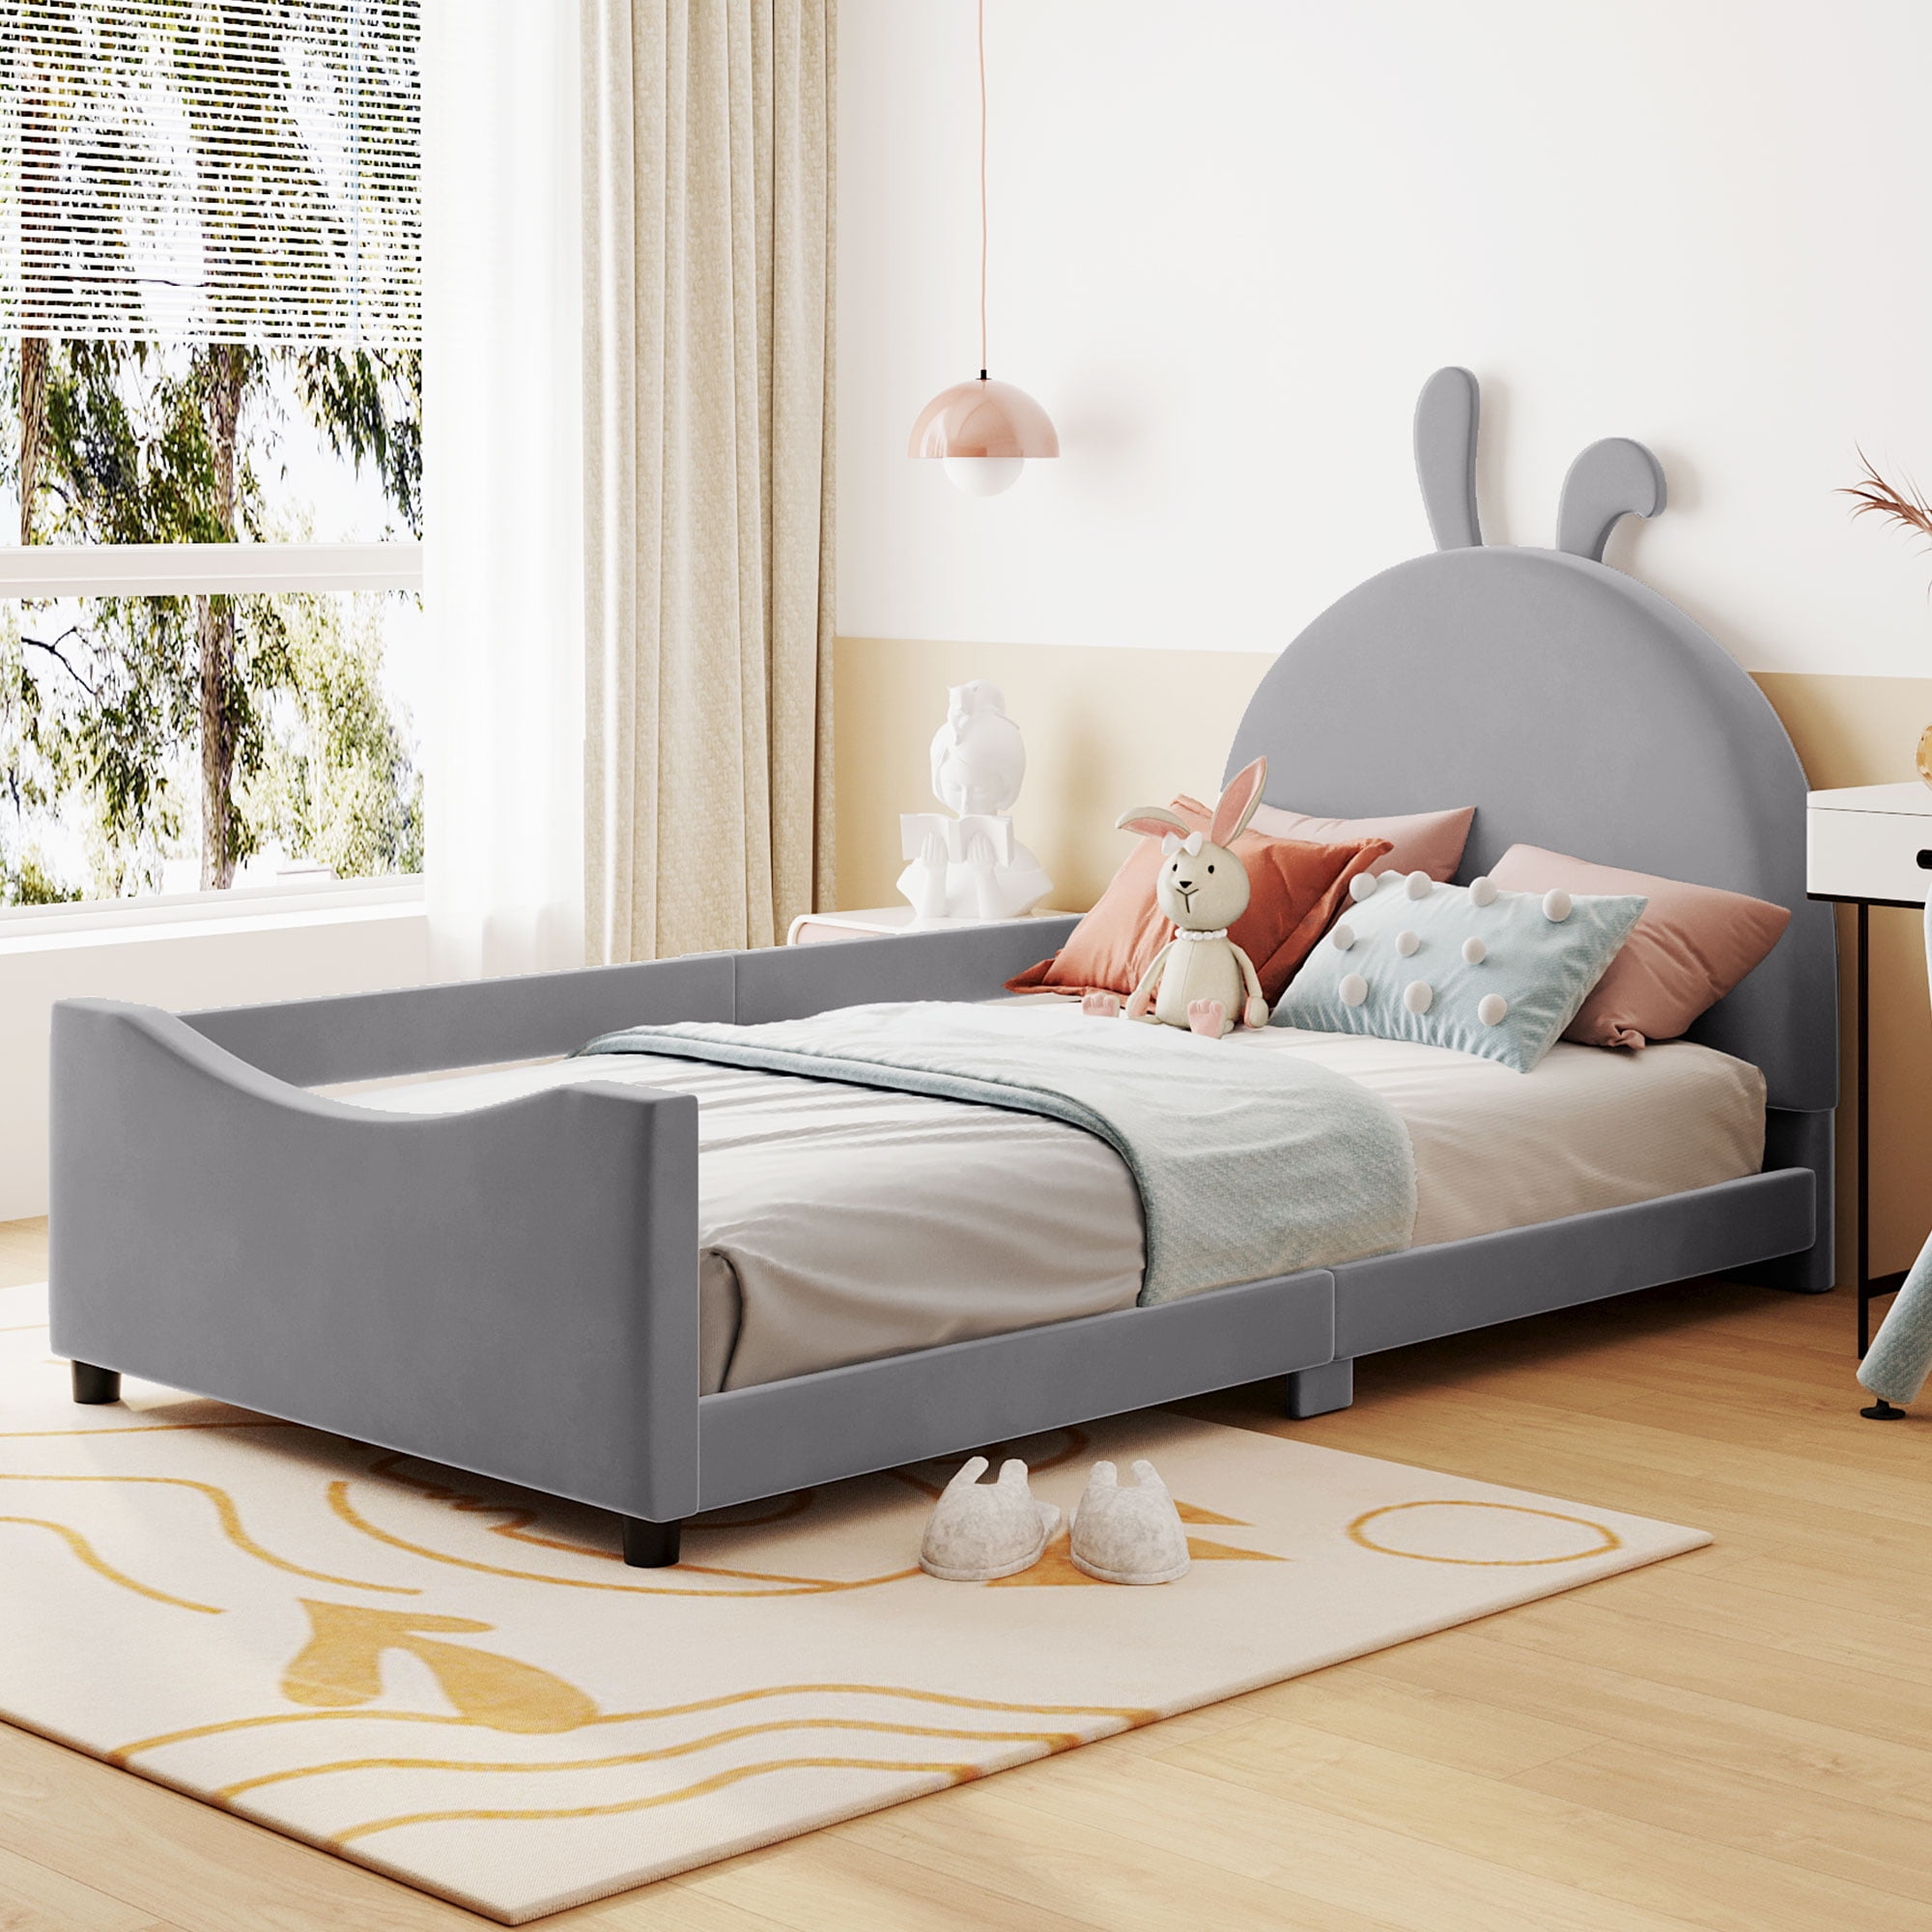 HSUNNS Twin Size Kids Upholstered Bed with Side Rail, Twin Size Upholstered  Platform Bed for Kids with Cute Rabbit Headboard, Low Profile Twin Bed for